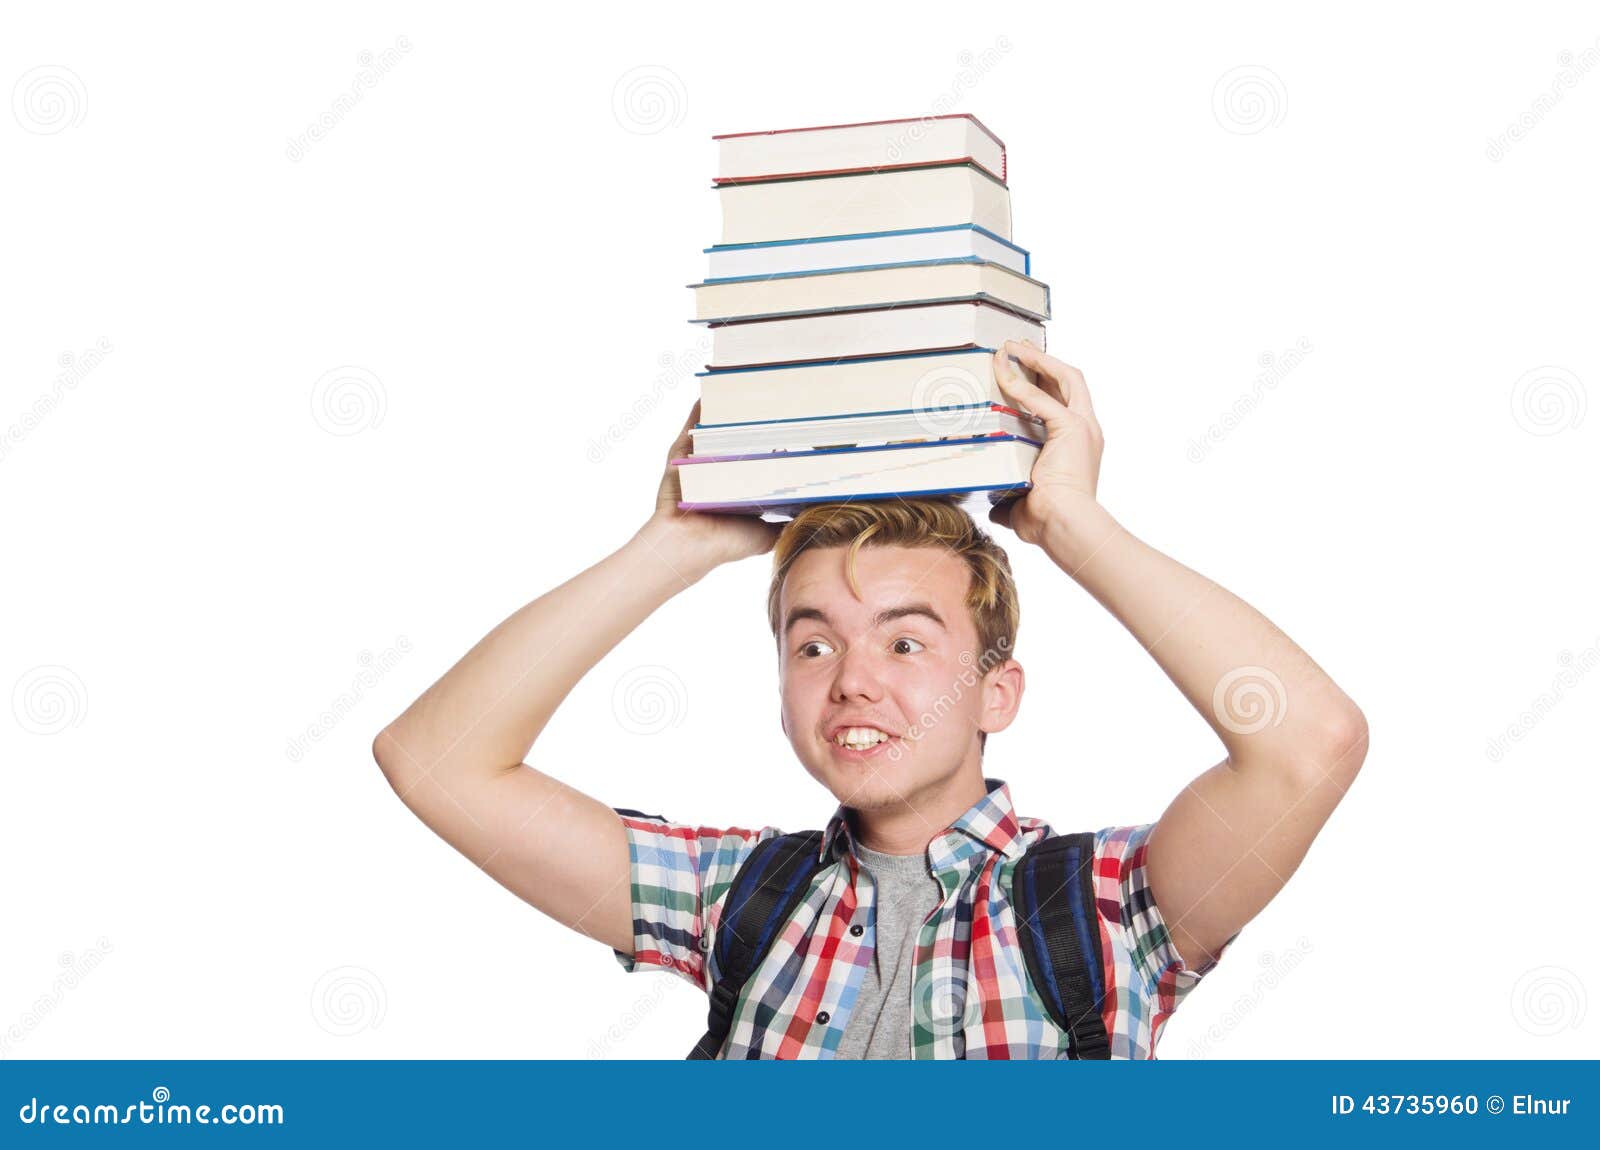 Funny student stock photo. Image of adult, books, graduate - 43735960